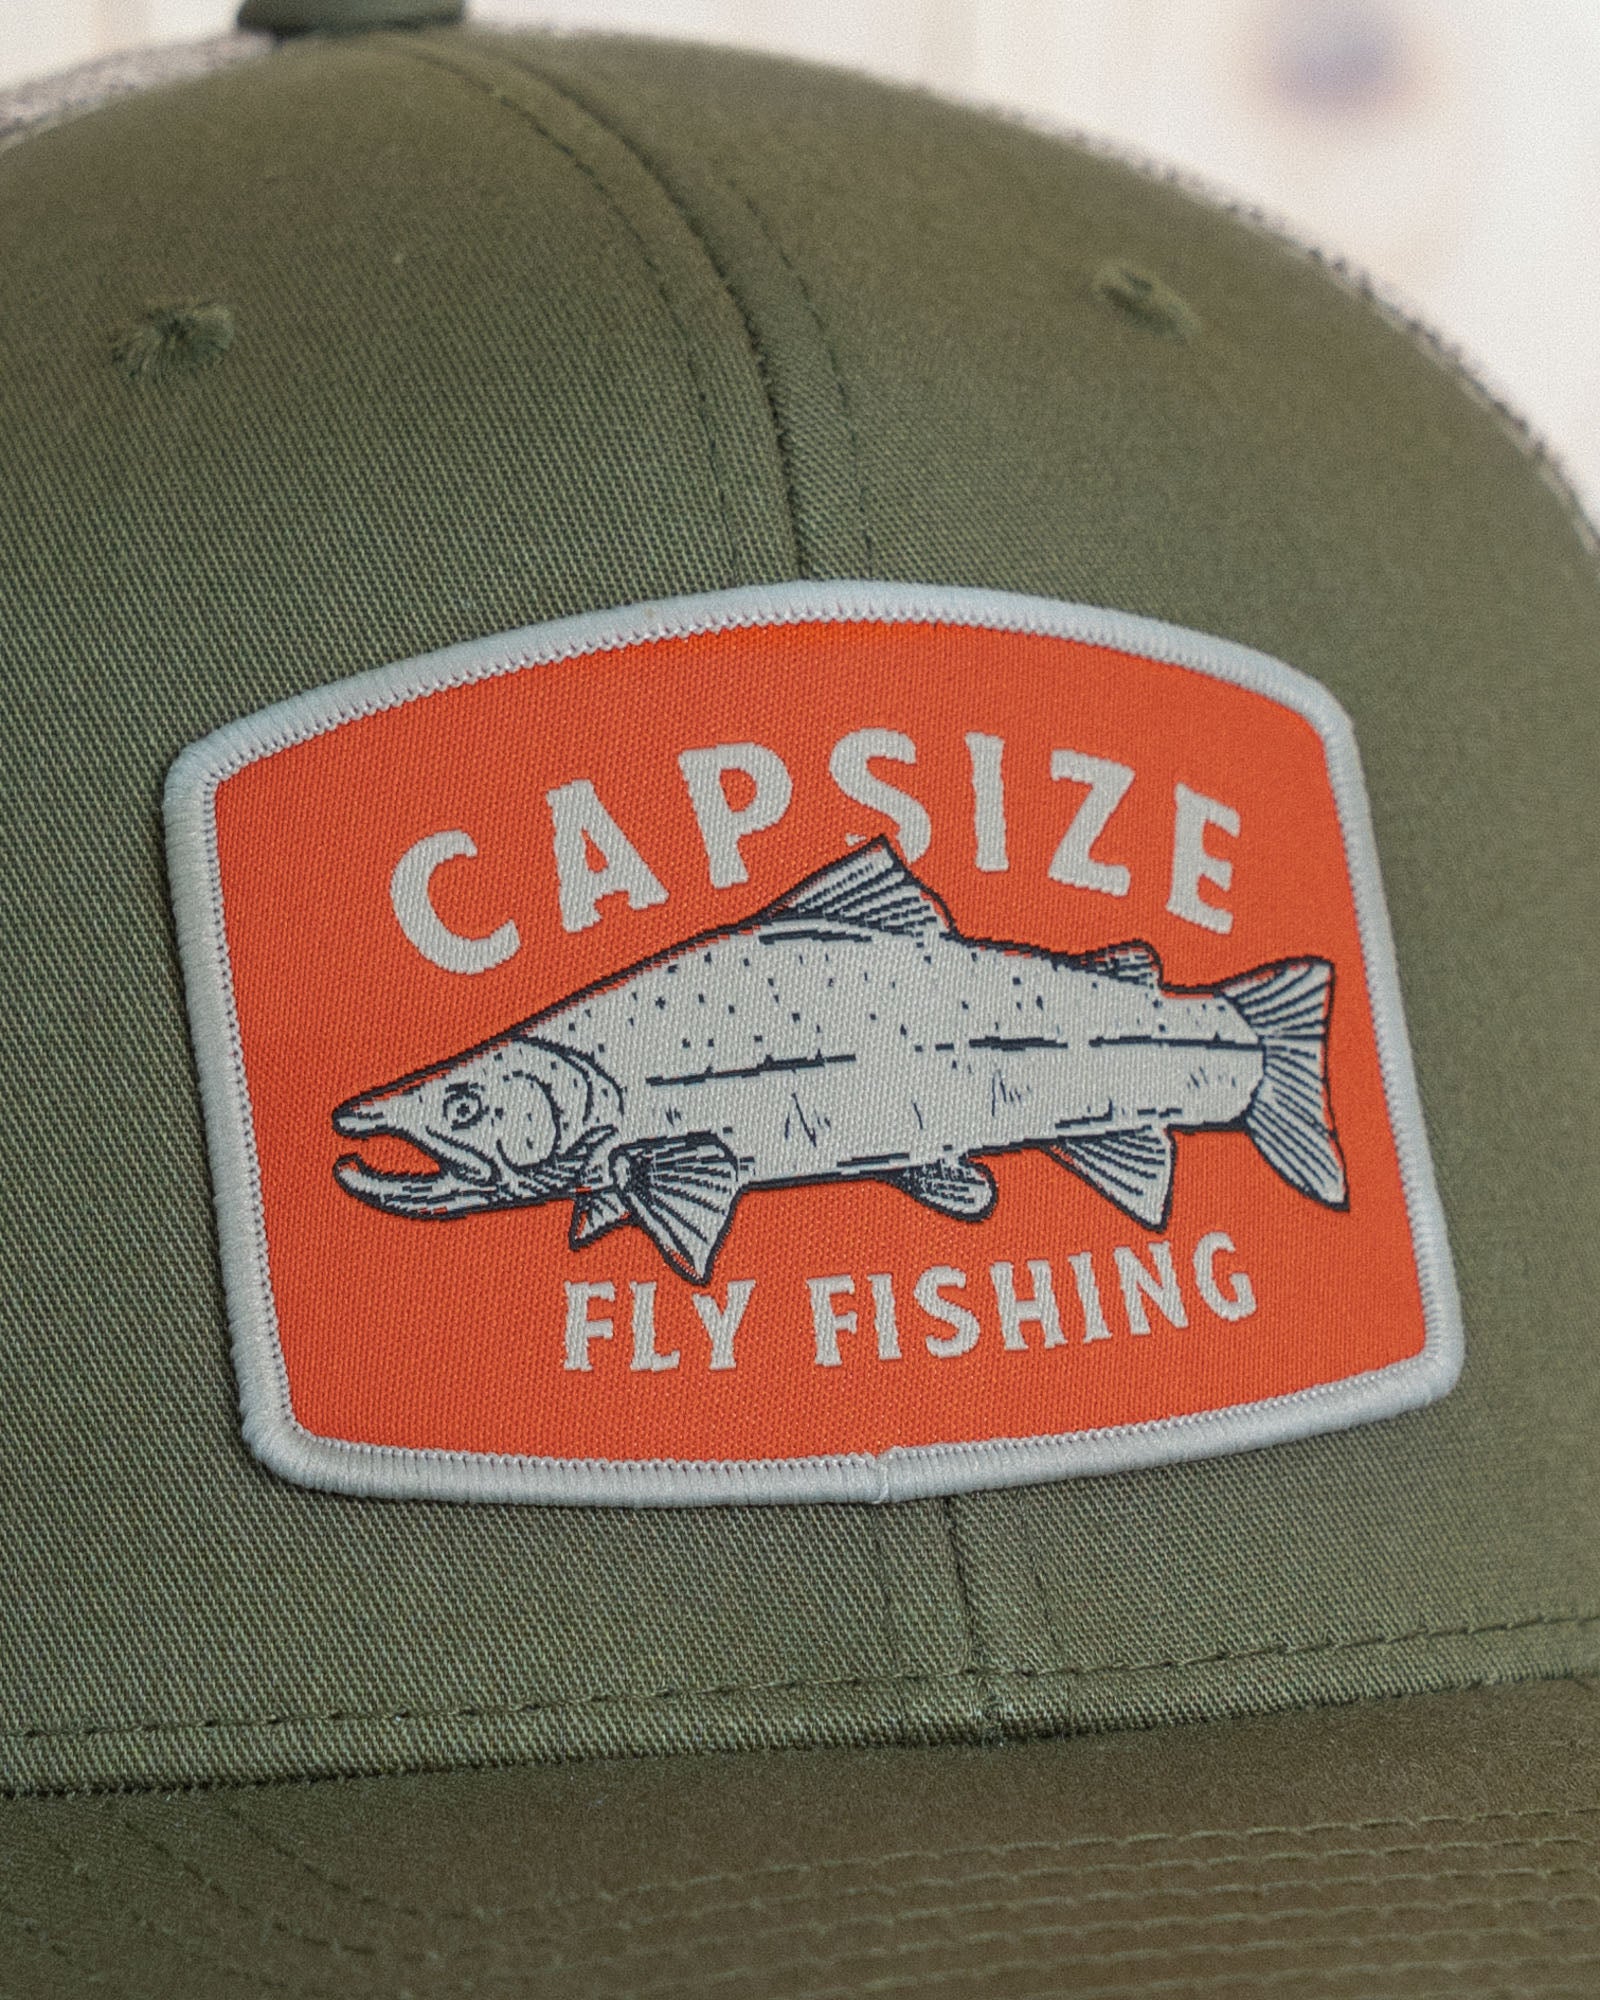 Fly Fishing Hat | Salmon Patch Olive Trucker - Capsize Fly Fishing